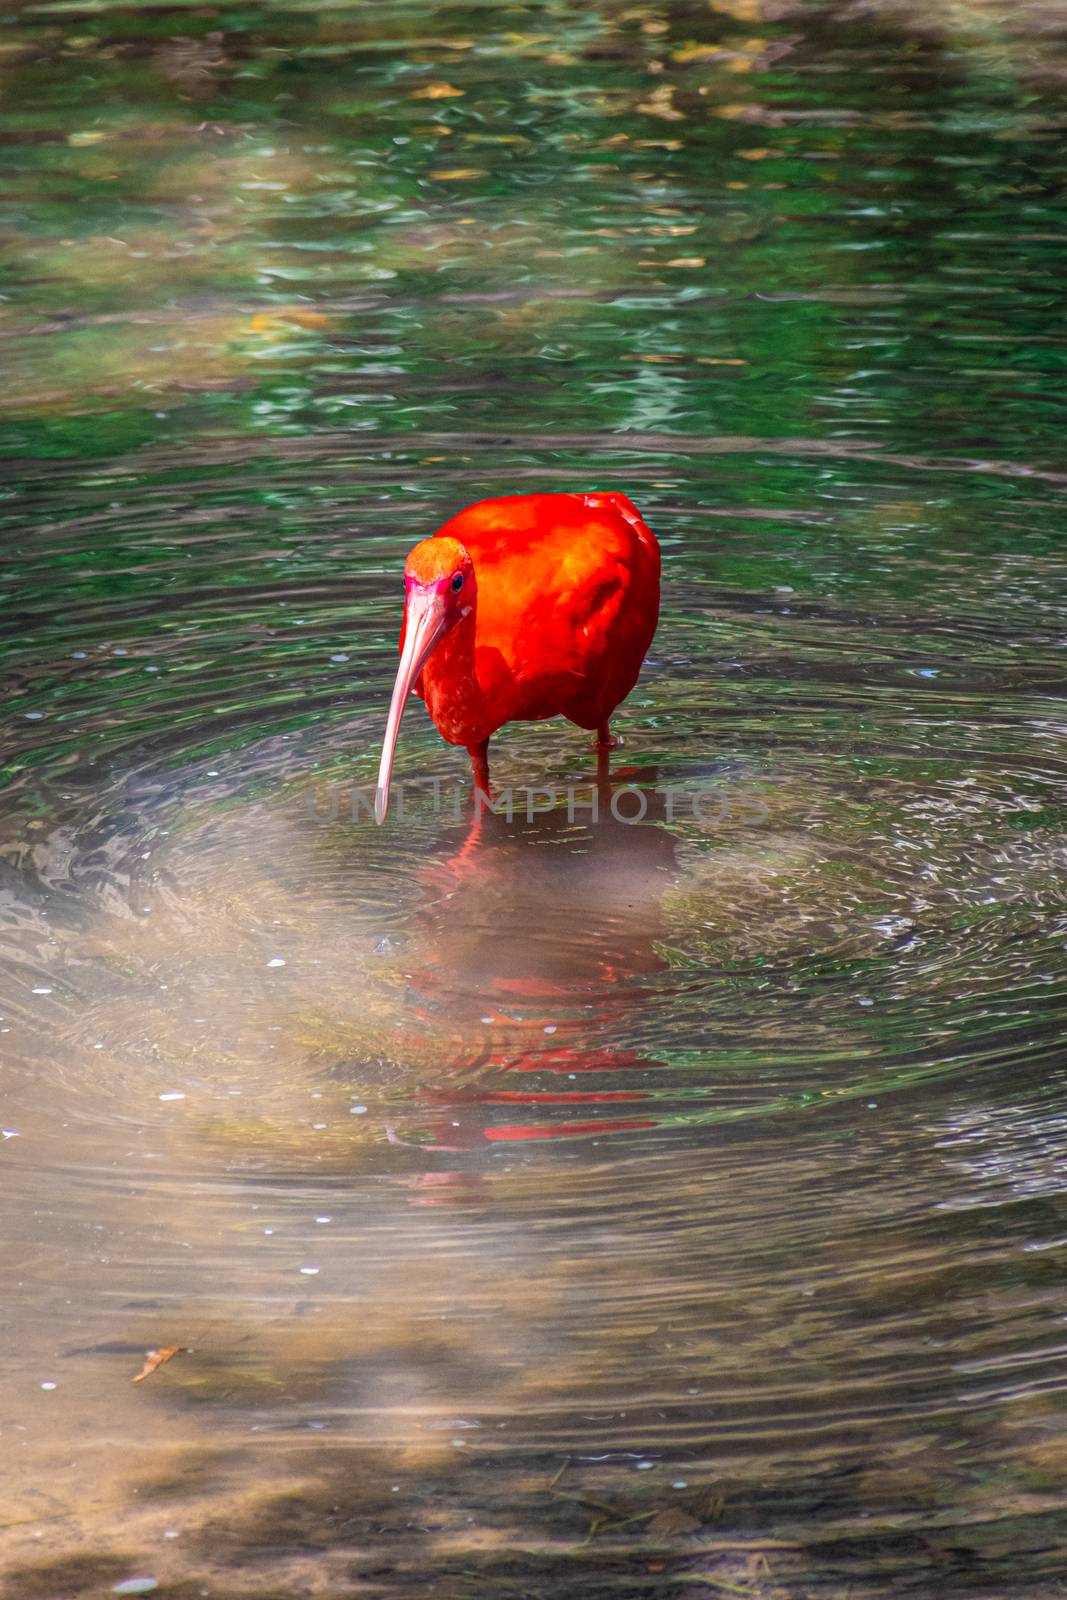 Scarlet ibis with red feathers and beak walking through shallow waters